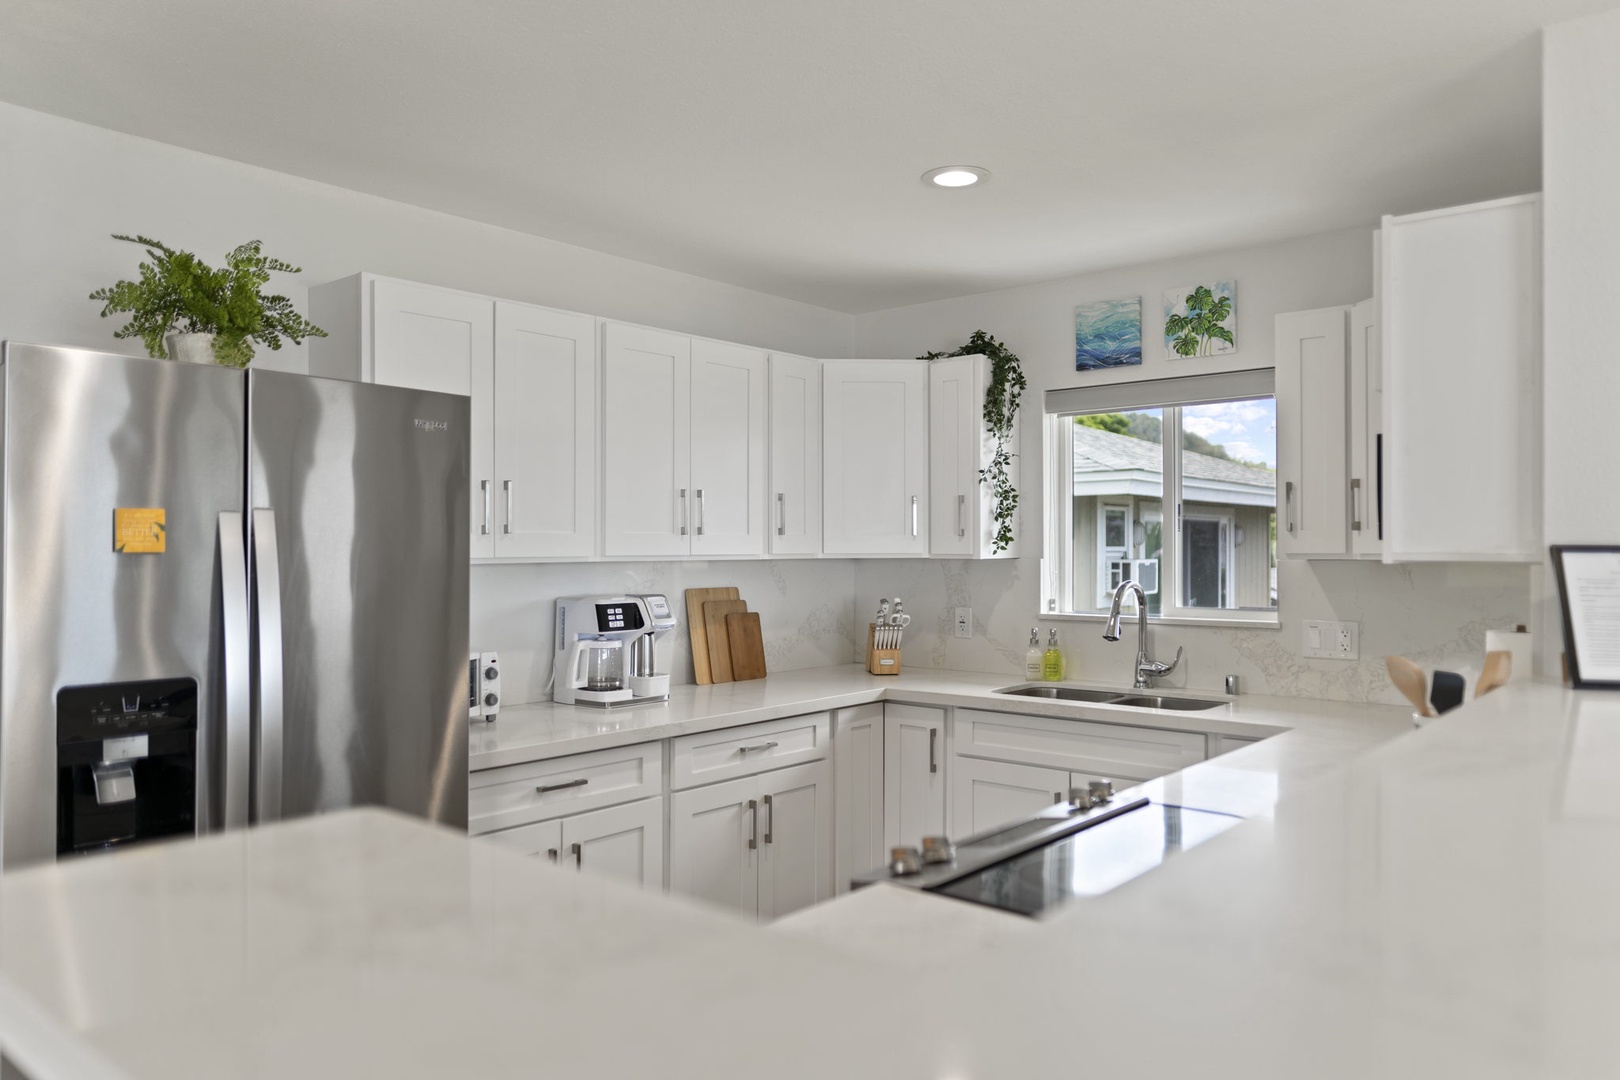 Haleiwa Vacation Rentals, Hale Nalu - The kitchen is updated and spacious with lots of natural light